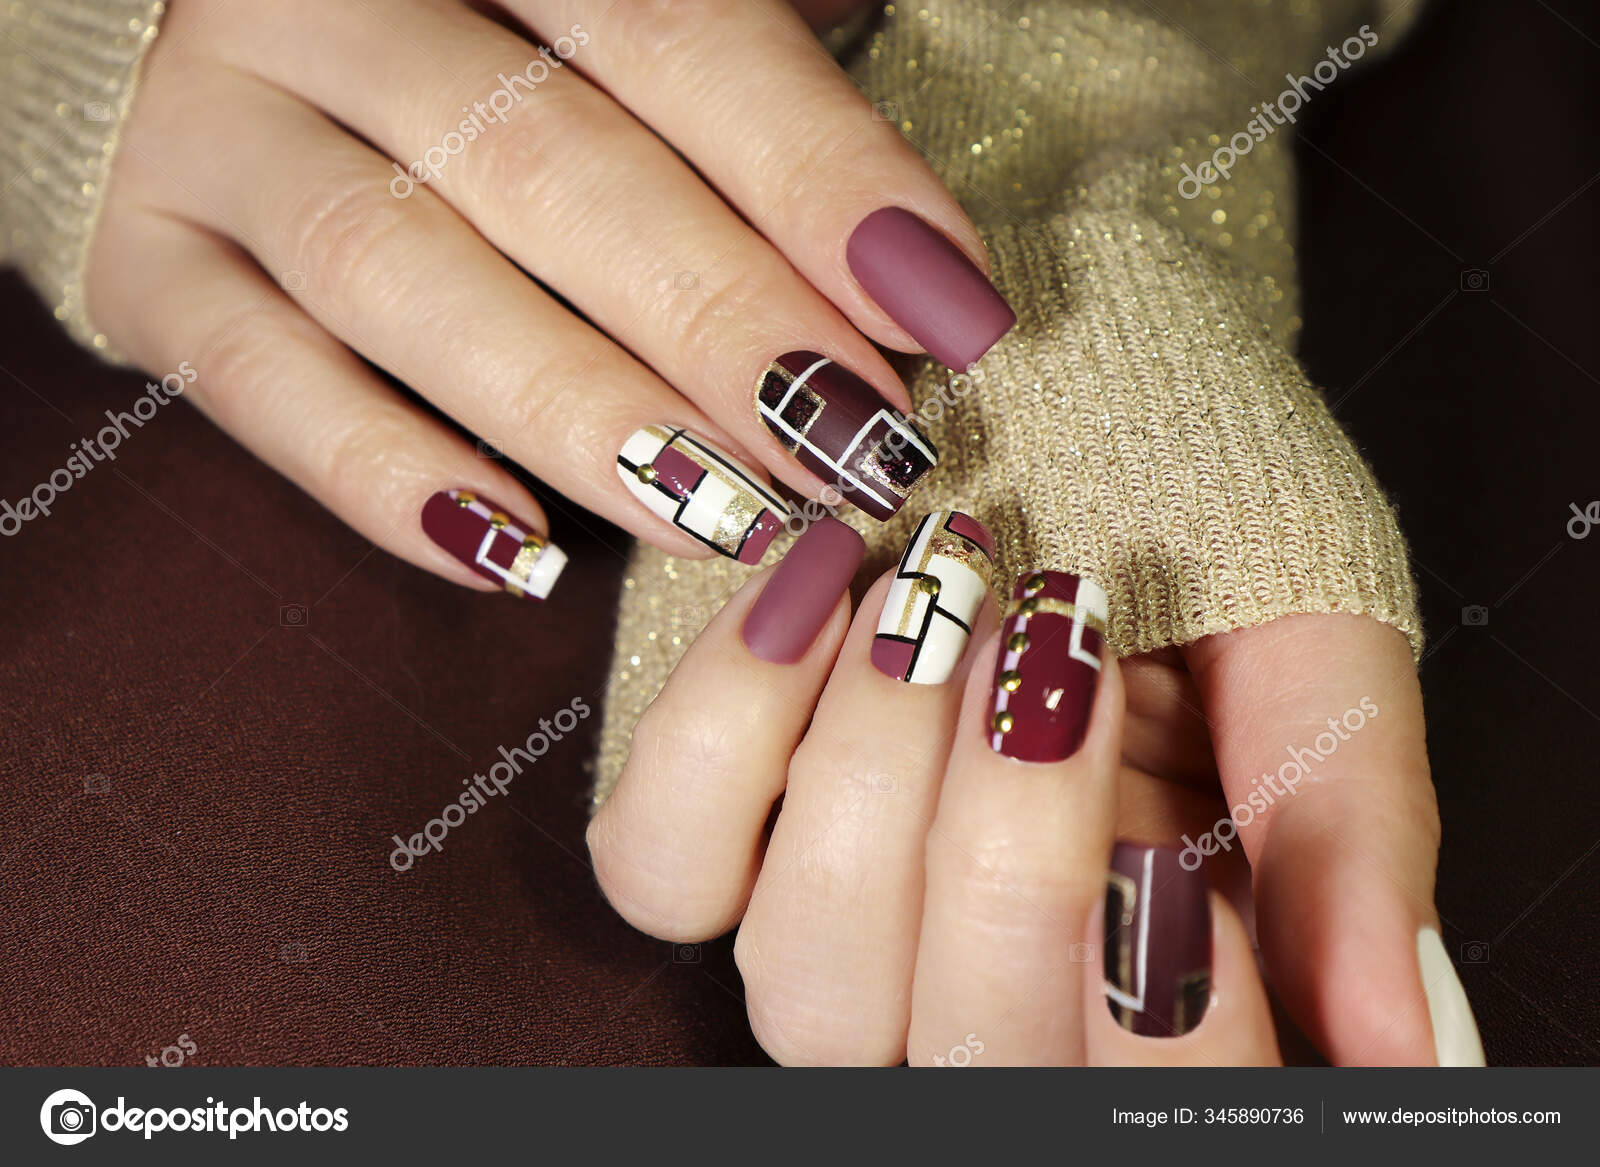 Buy CoolNail Gold Color Diamond Matte Burgundy Press on Wear False Nails  Extra Long Stiletto Frosted Fingersnails Adhesive Tapes Faux Ongles Online  at Low Prices in India - Amazon.in